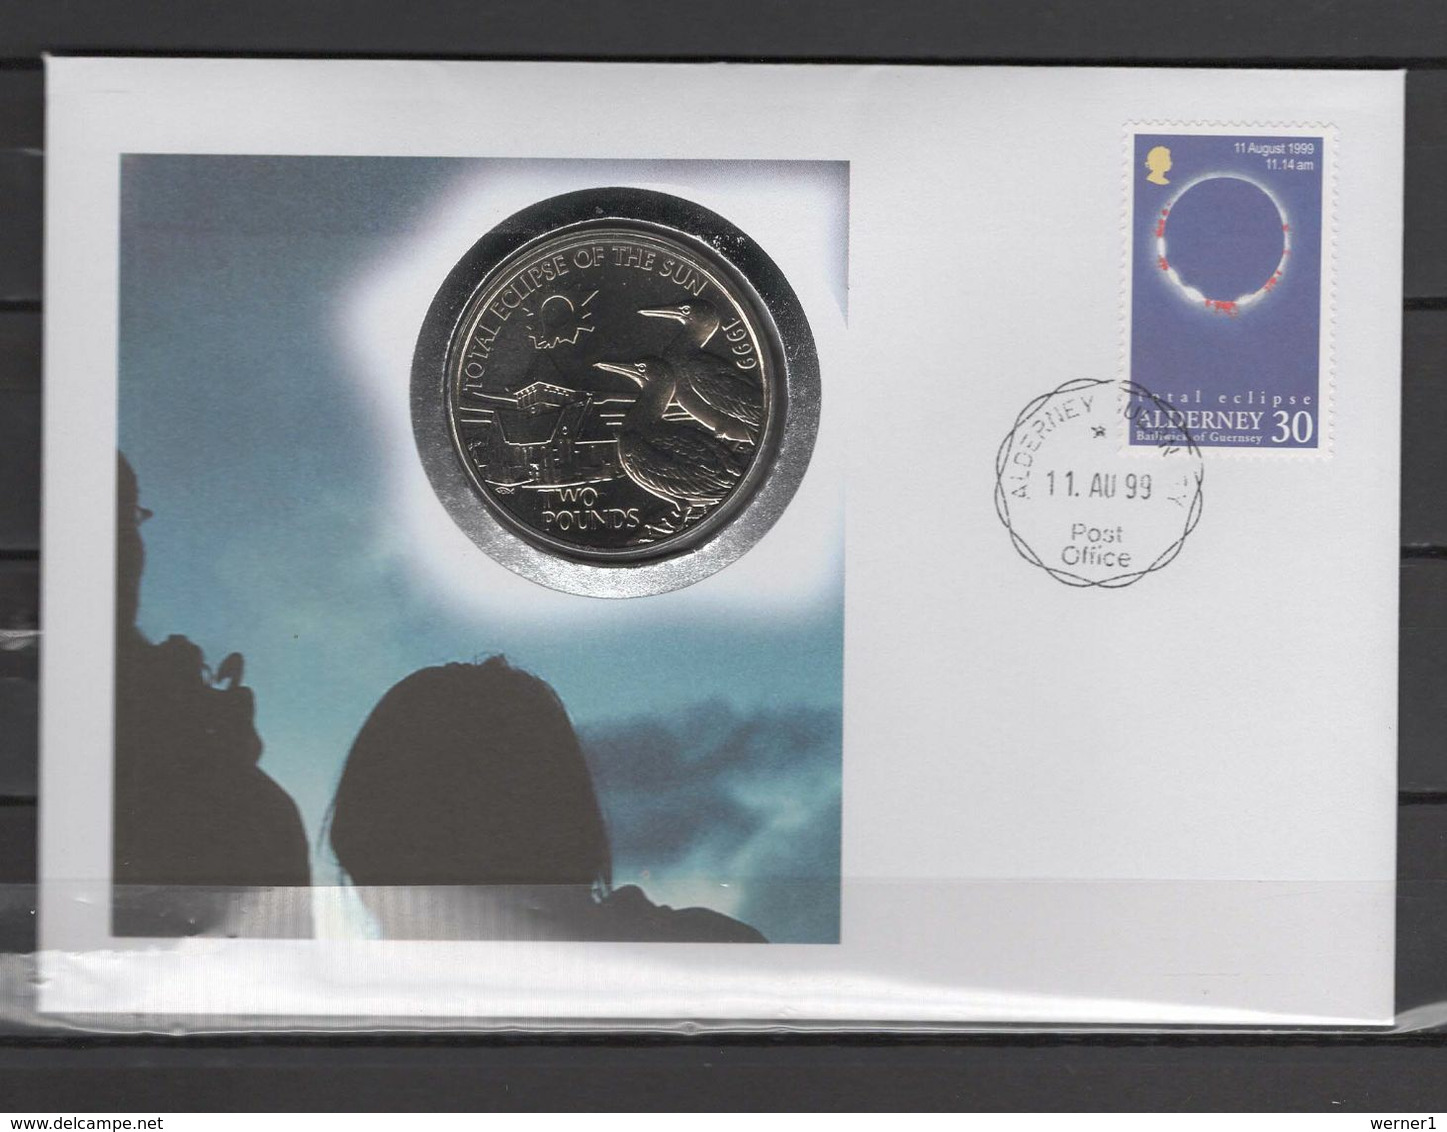 Alderney 1999 Space, Solar Eclipse Numismatic Cover With 2 Pound Coin - Europa